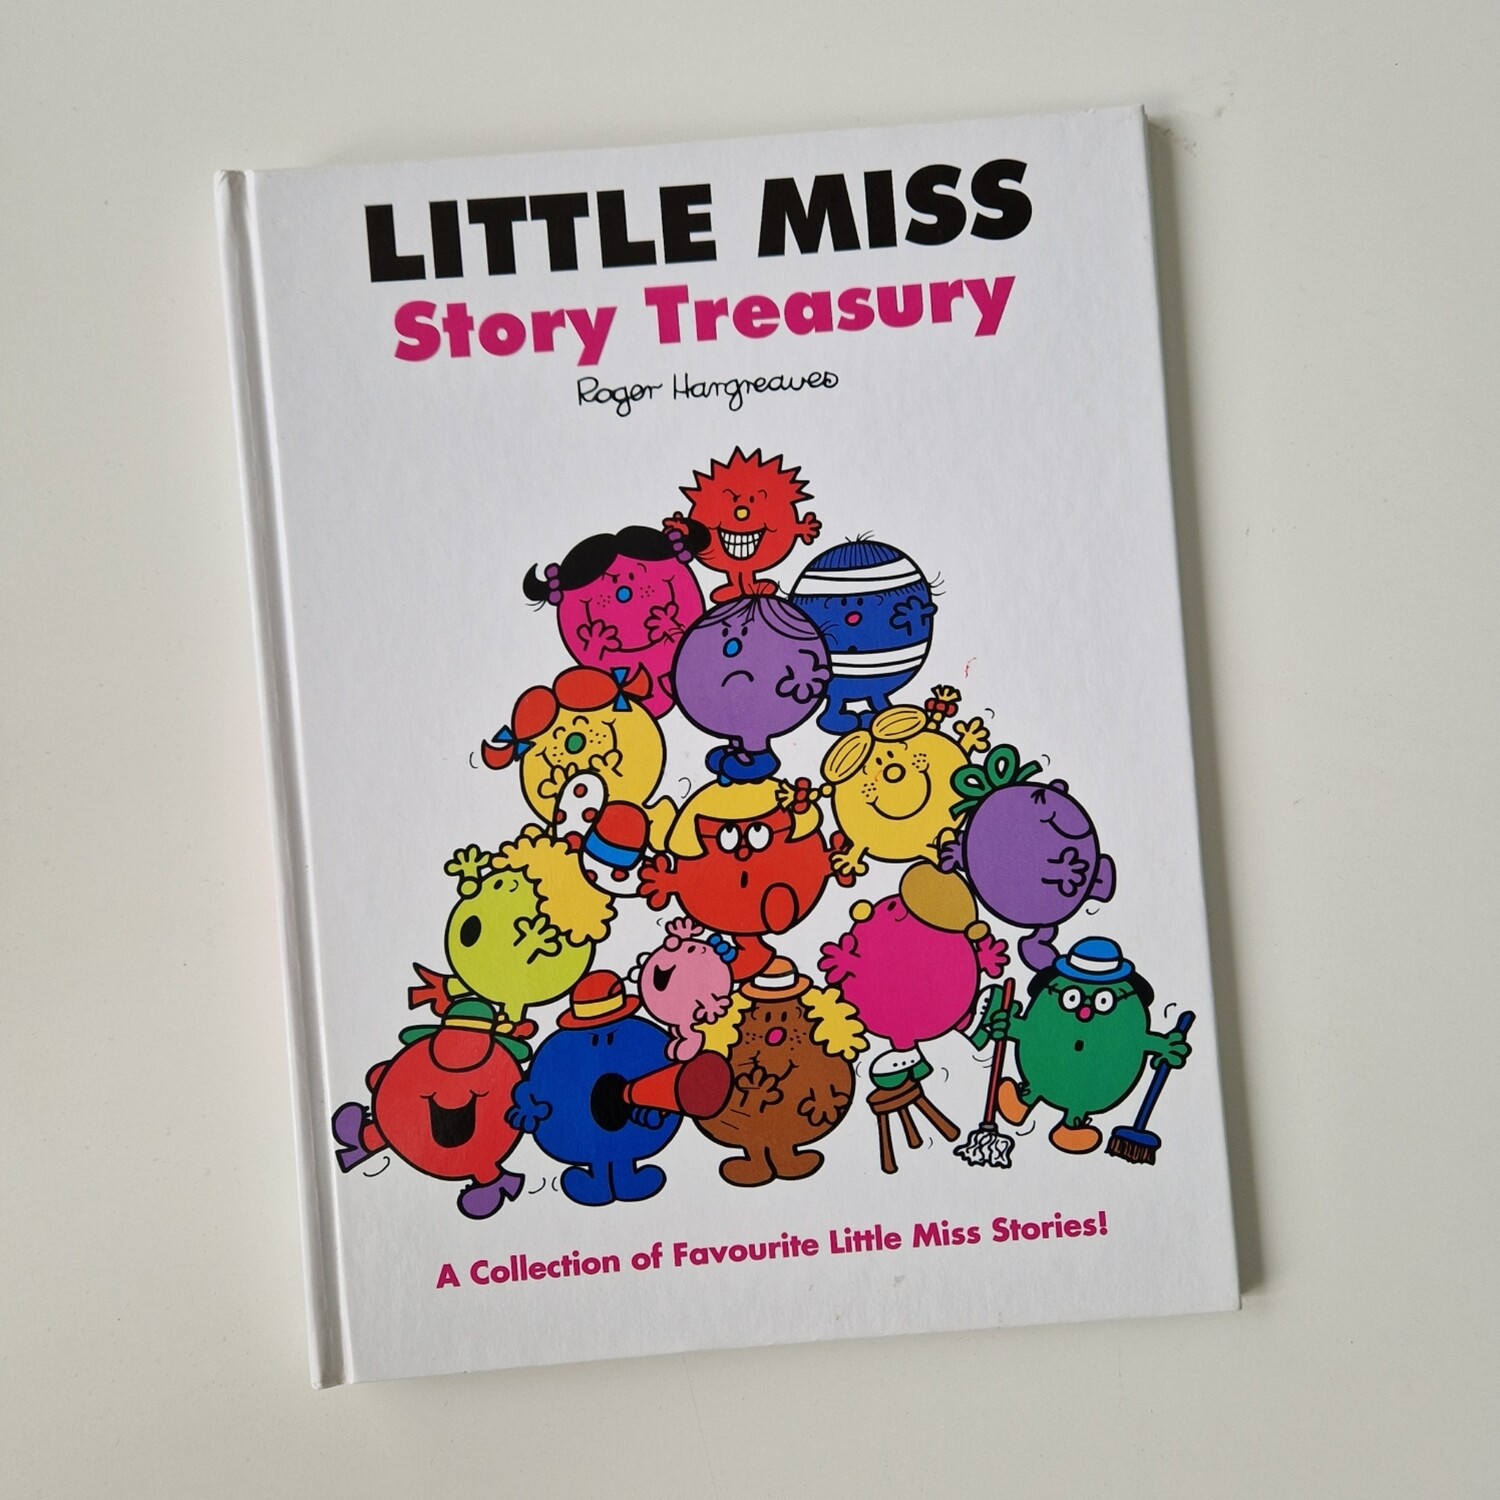 Little Miss Story Treasury - no original book pages